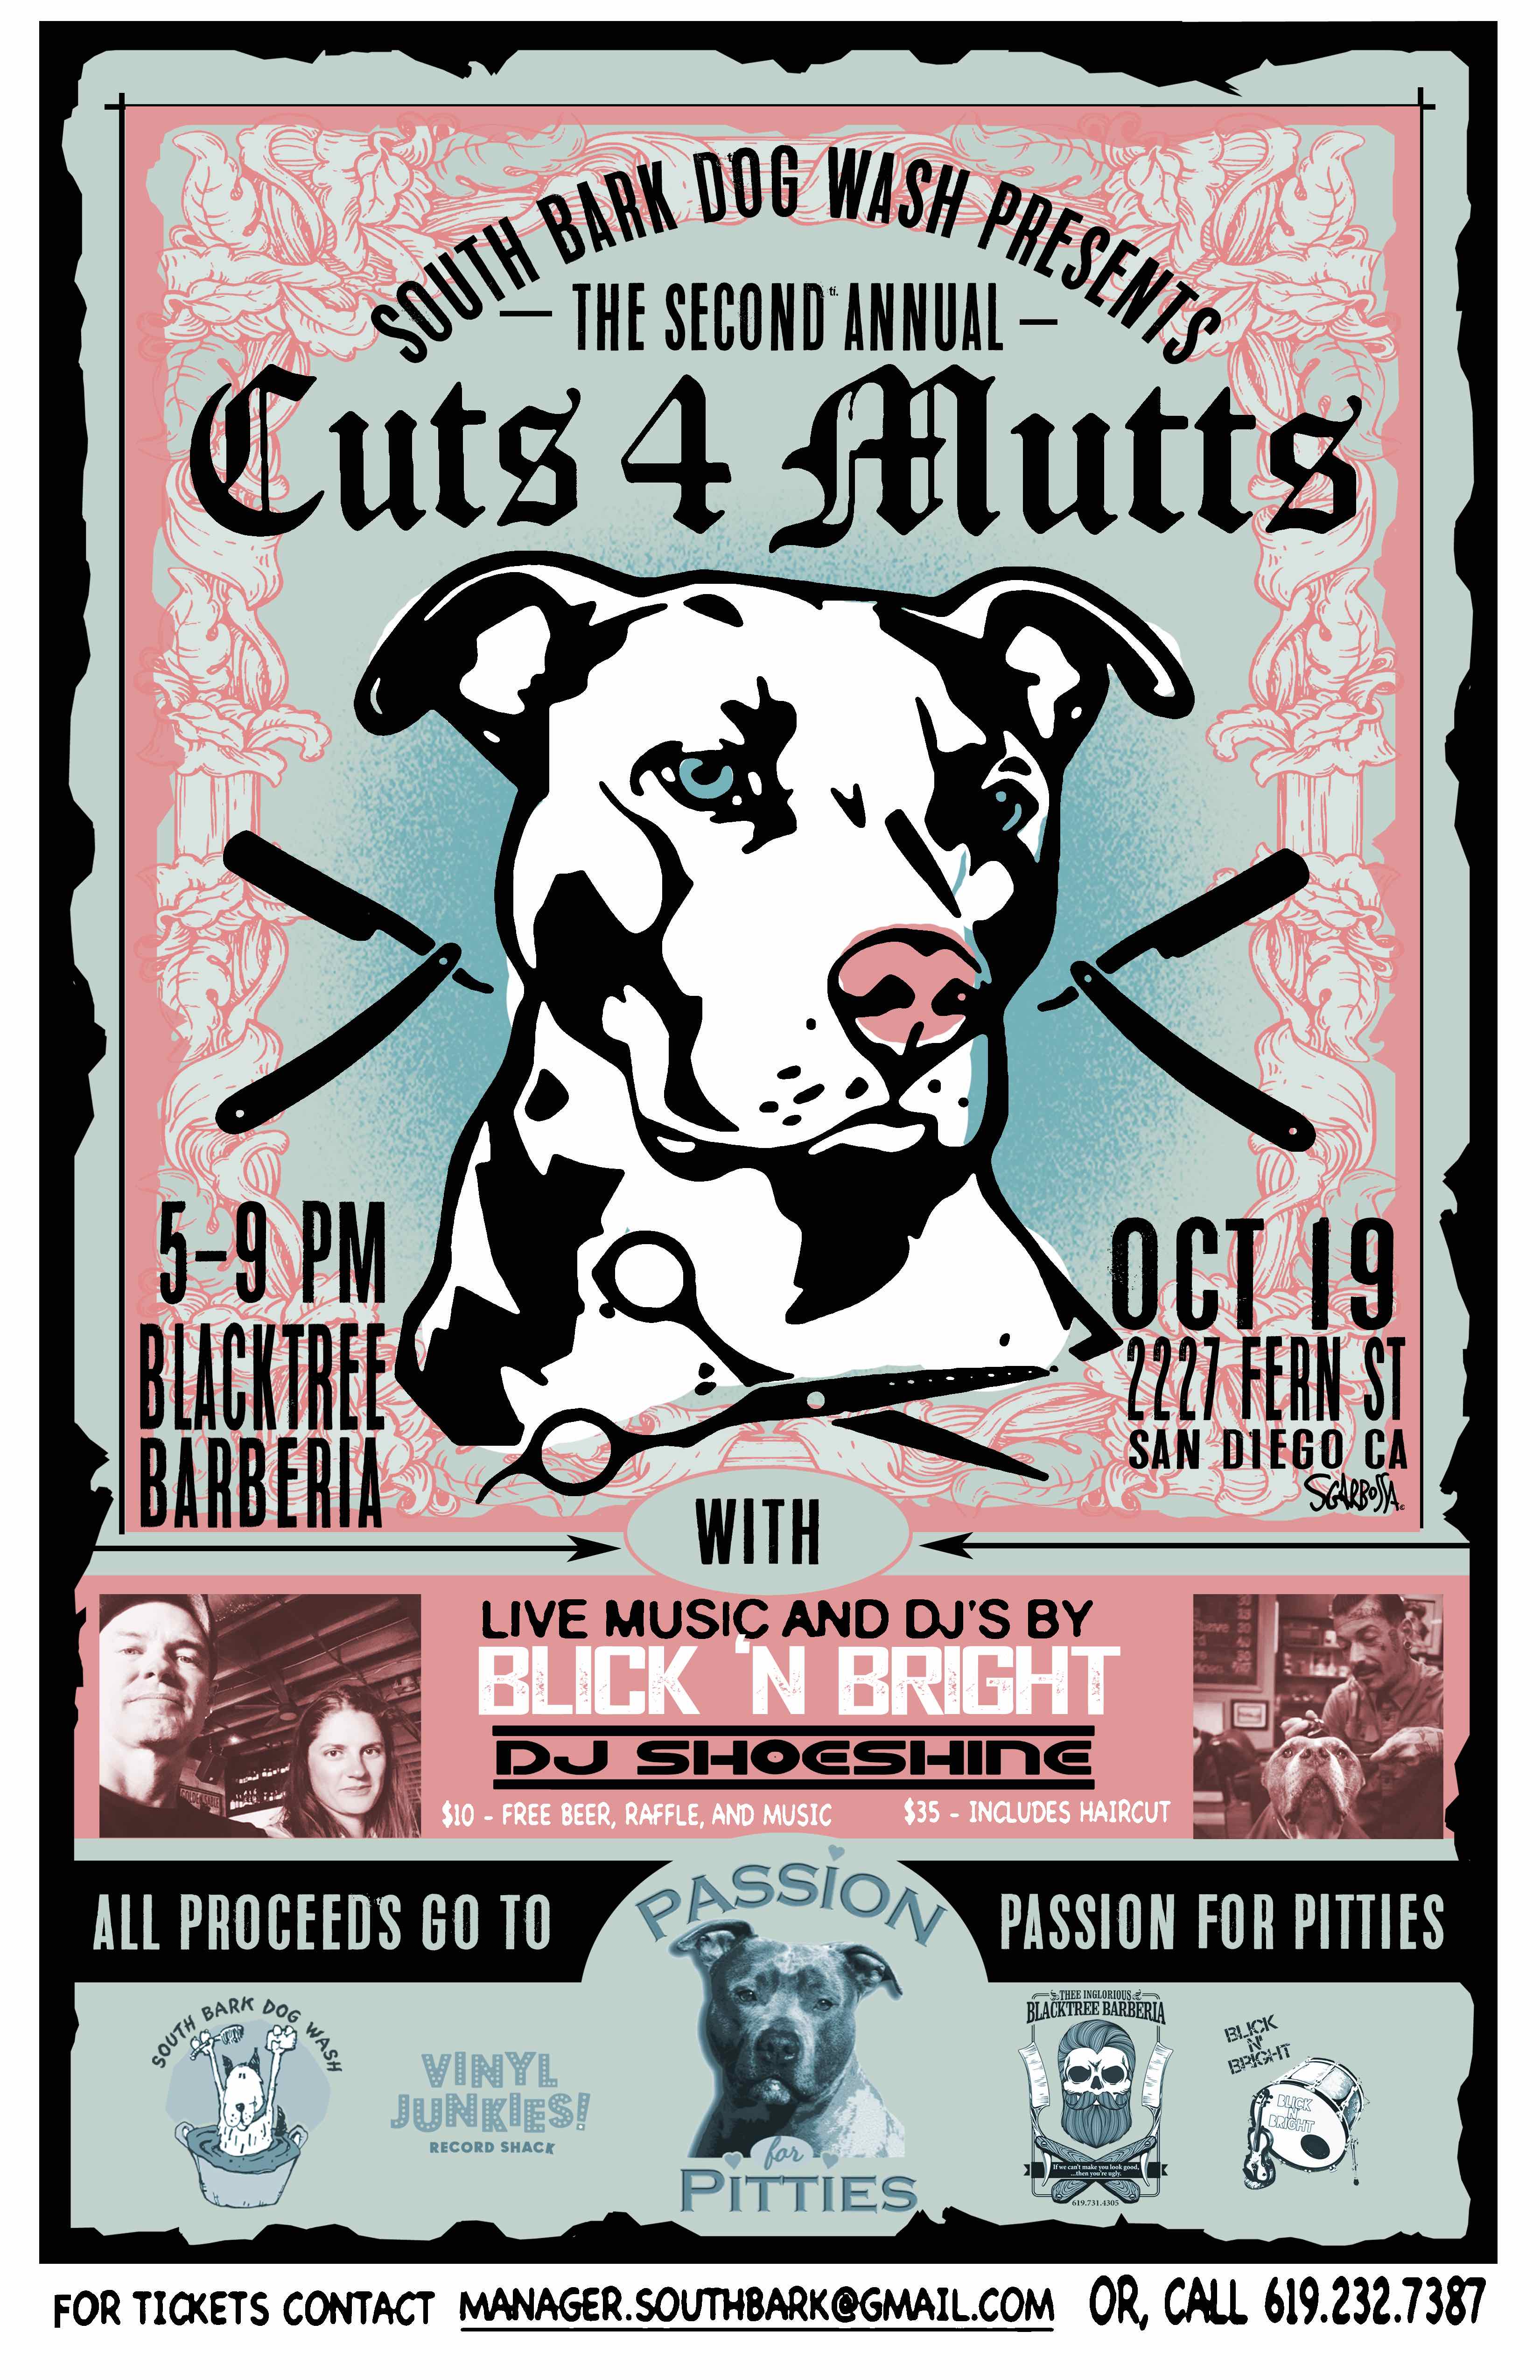 Second Annual Cuts 4 Mutts: Get your Hair Cut for Passion for Pitties Rescue of San Diego @ Thee Inglorious Blacktree Barberia of South Park | San Diego | California | United States